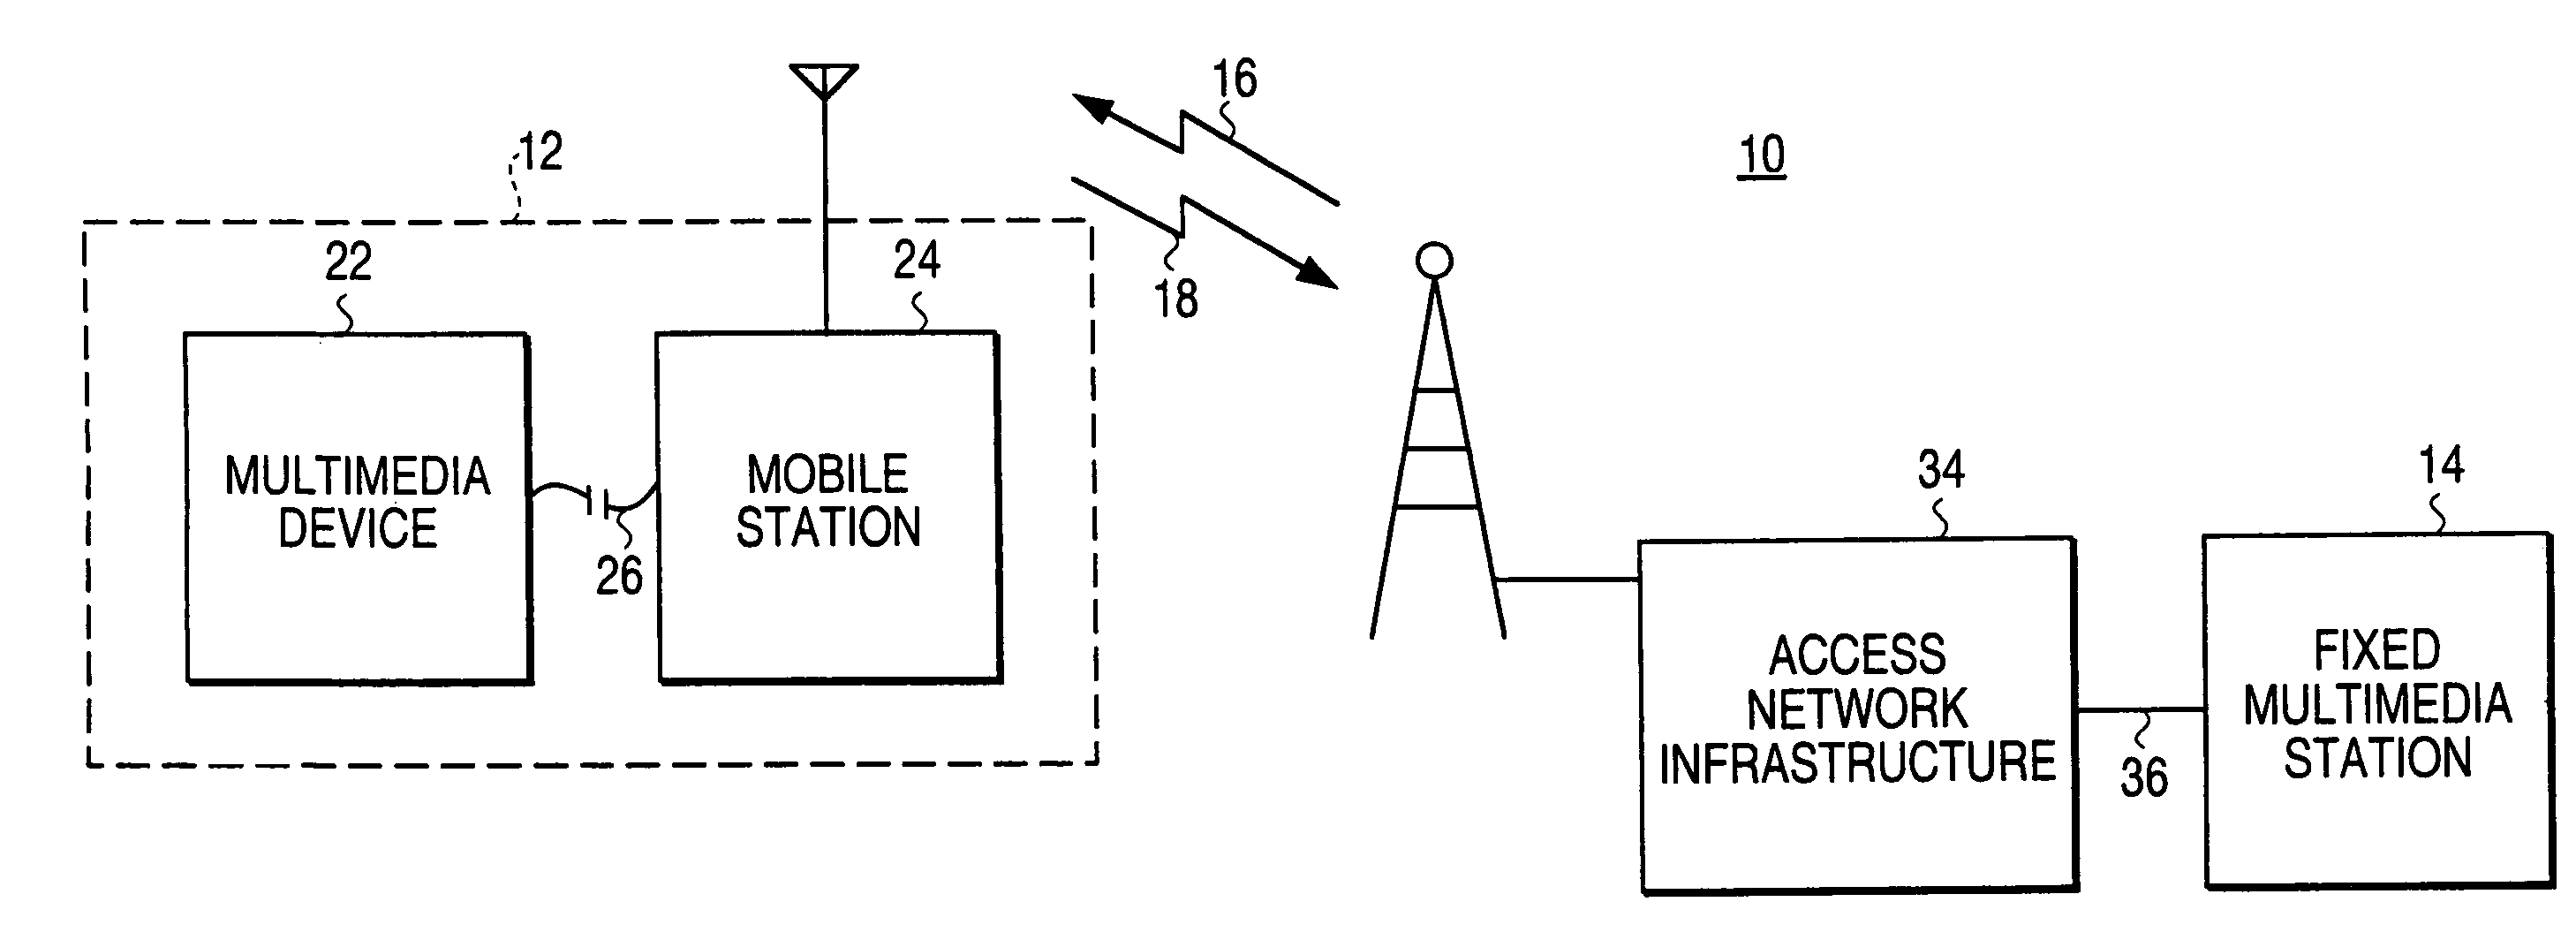 Terminal-based link adaptation scheme having a detector which monitors application signaling and a requestor which requests a special channel based on the detection